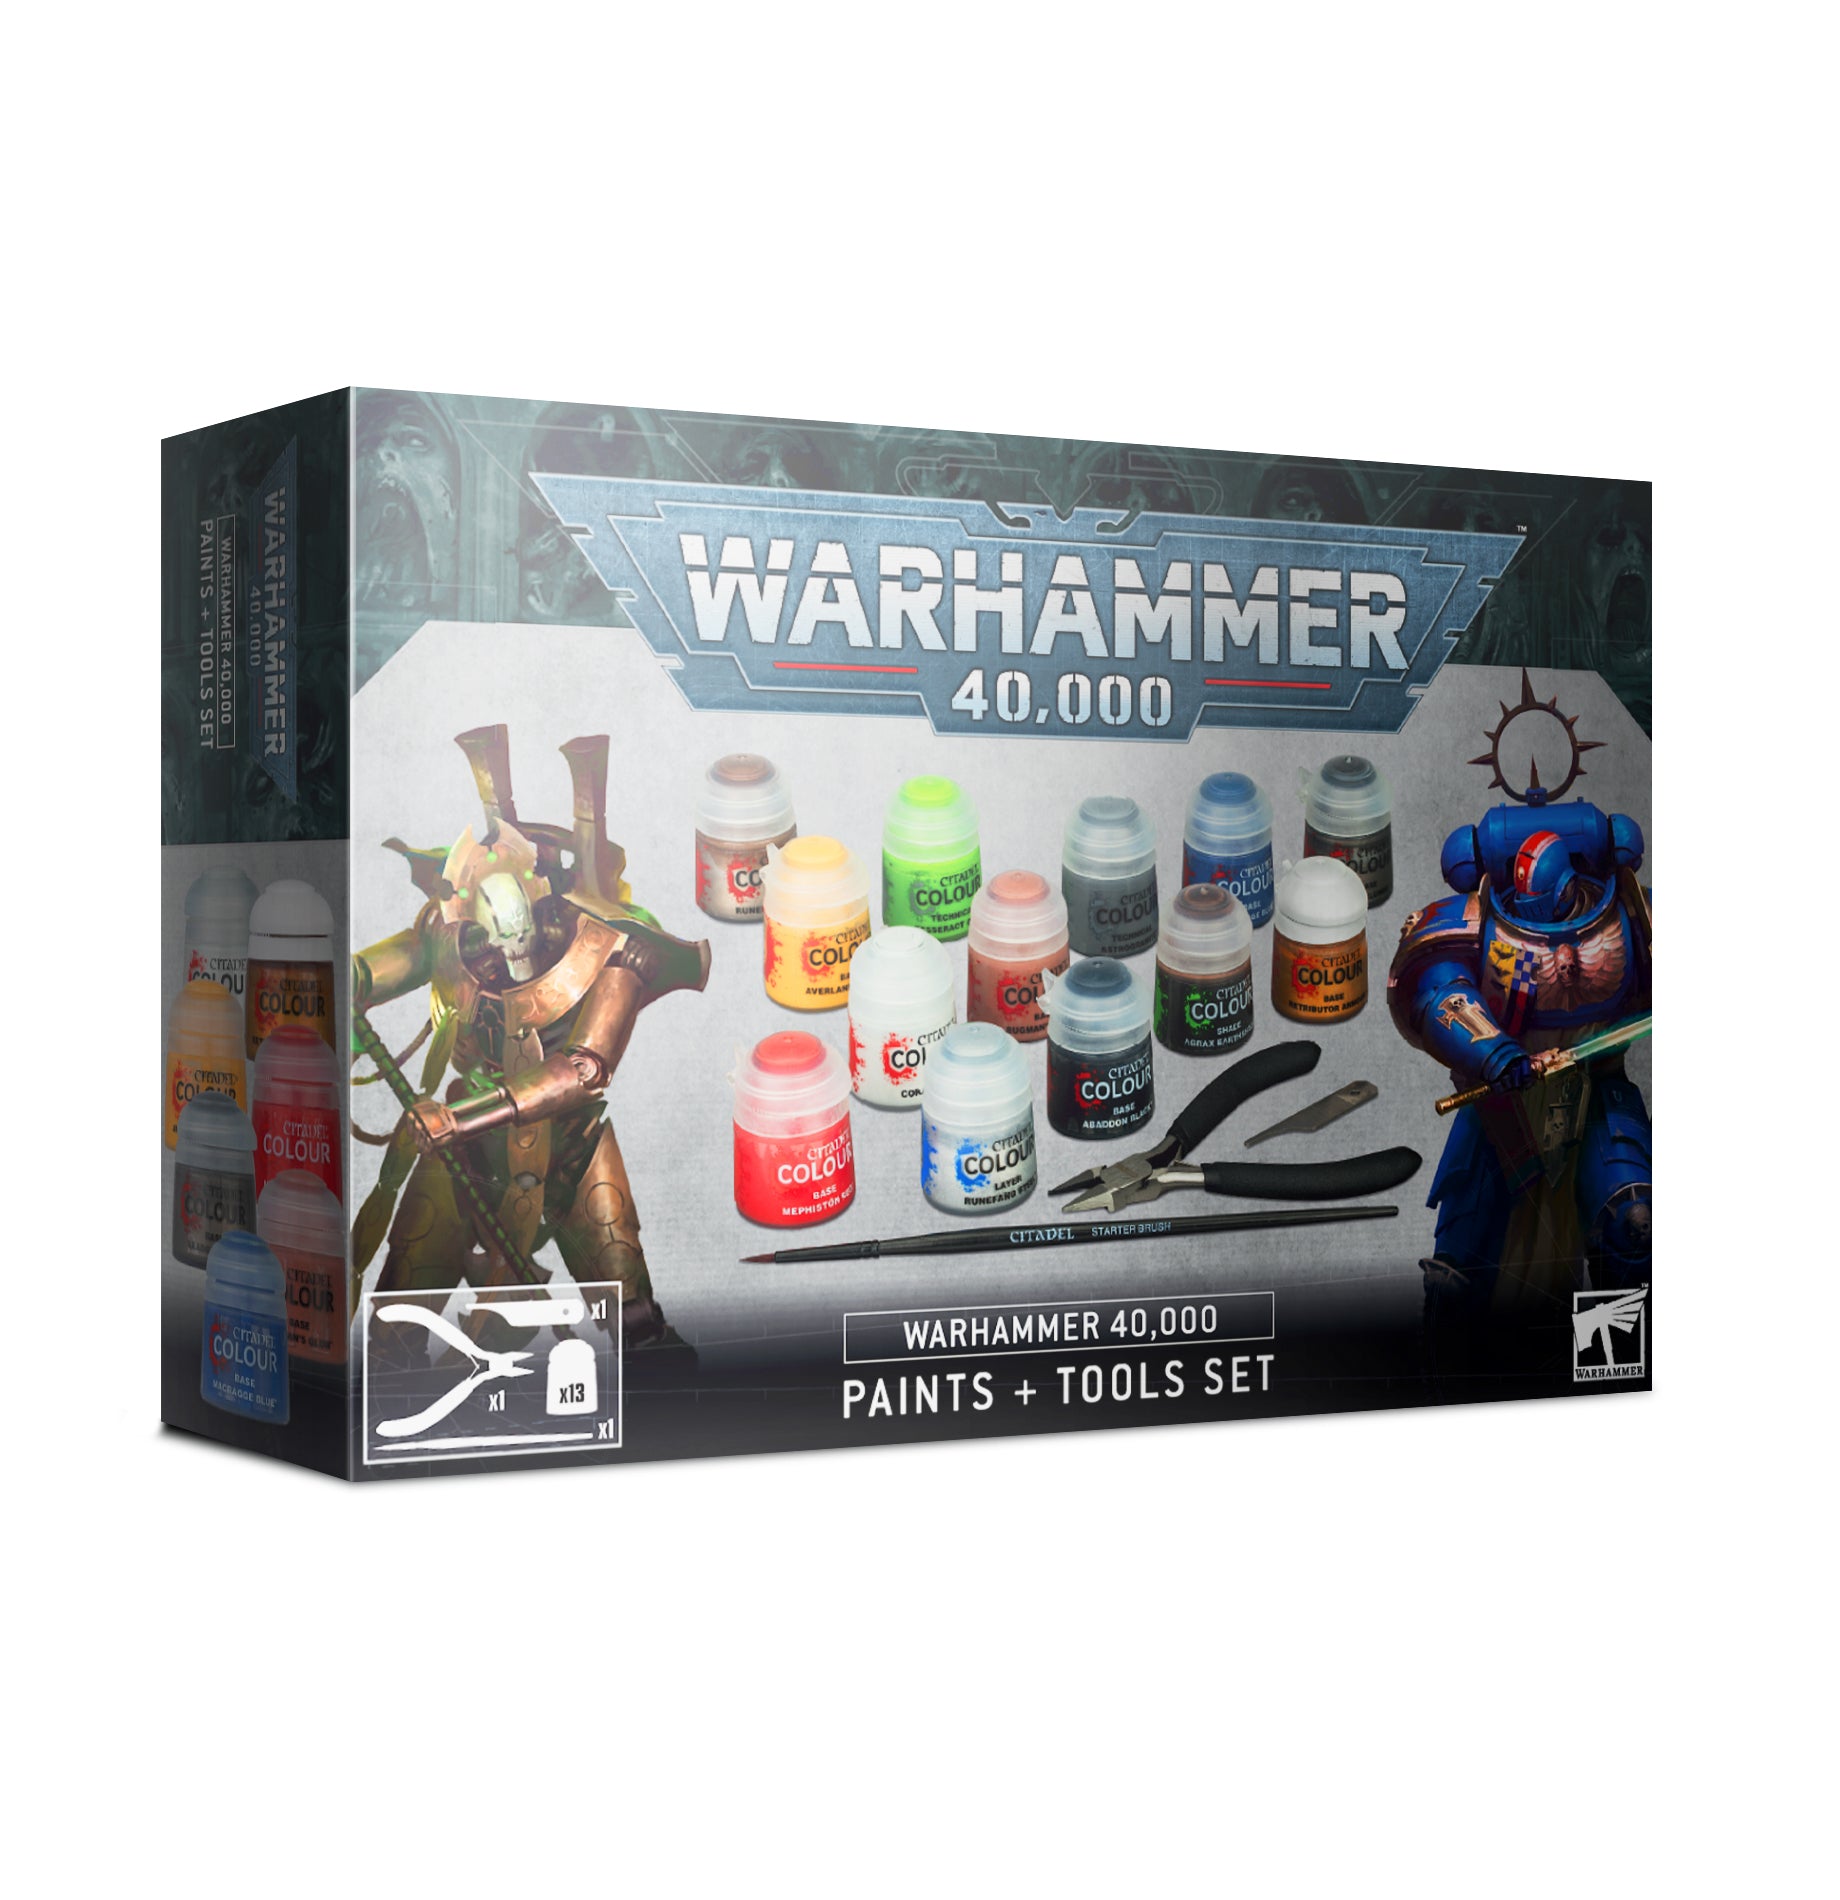 Warhammer 40,000: Paints + Tools Set - Bards & Cards